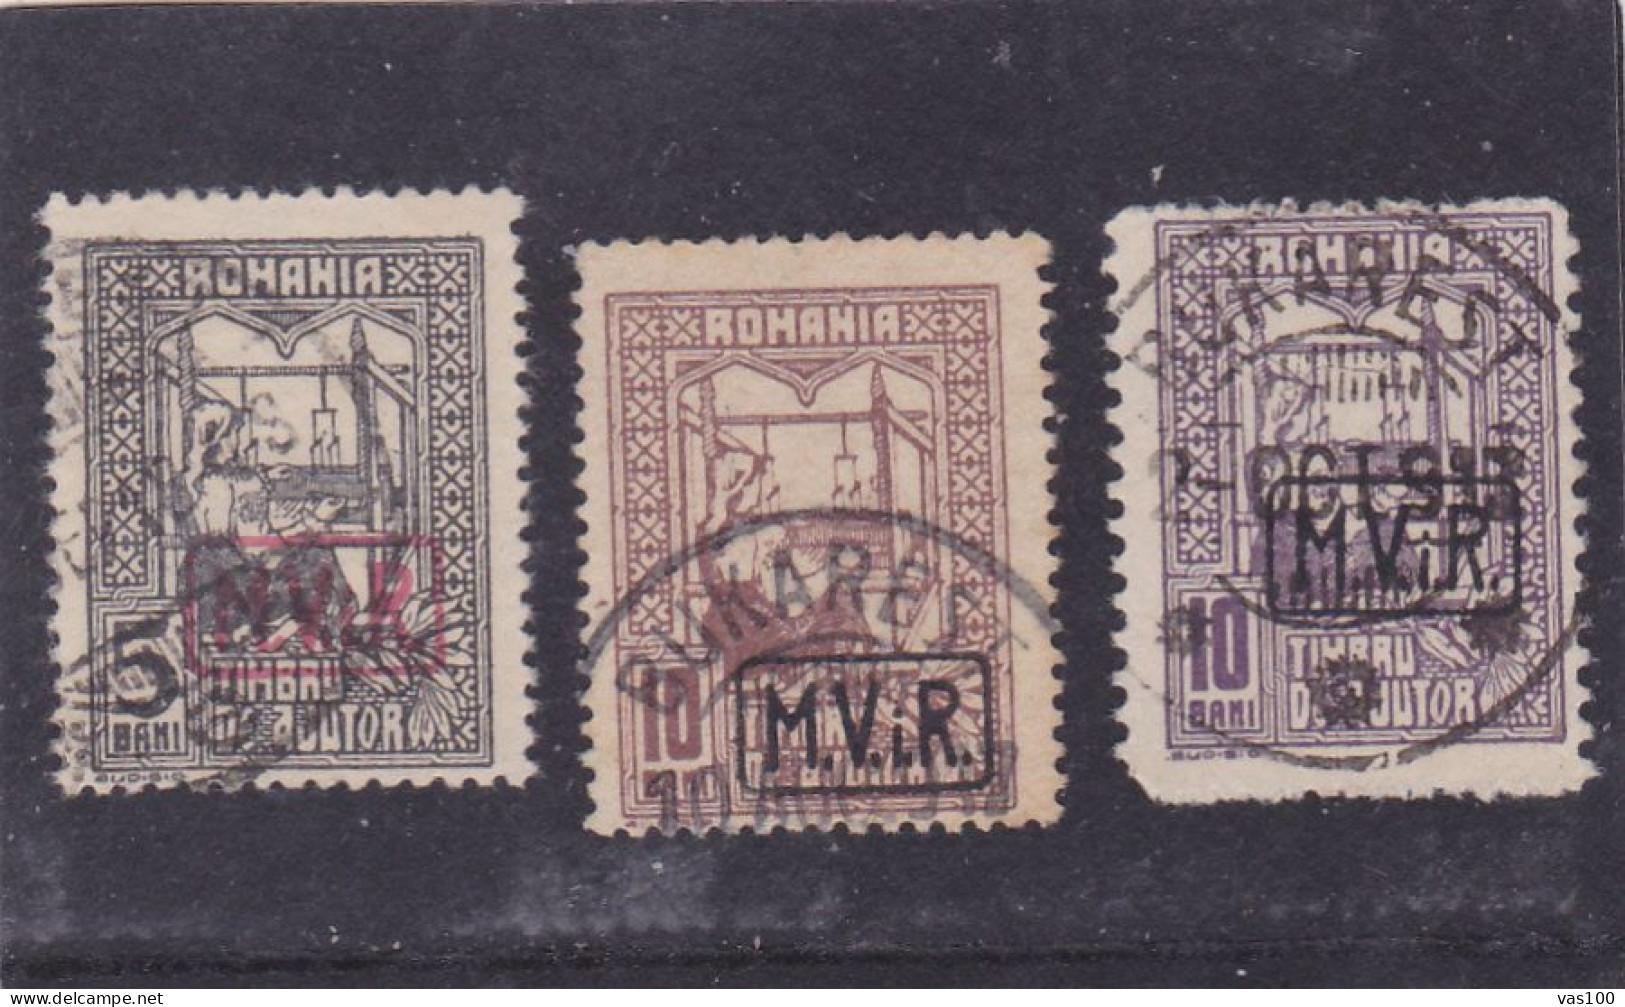 Germany WW1 Occupation In Romania 1917 MViR  3 STAMPS POSTAGE DUE USED - Bezetting